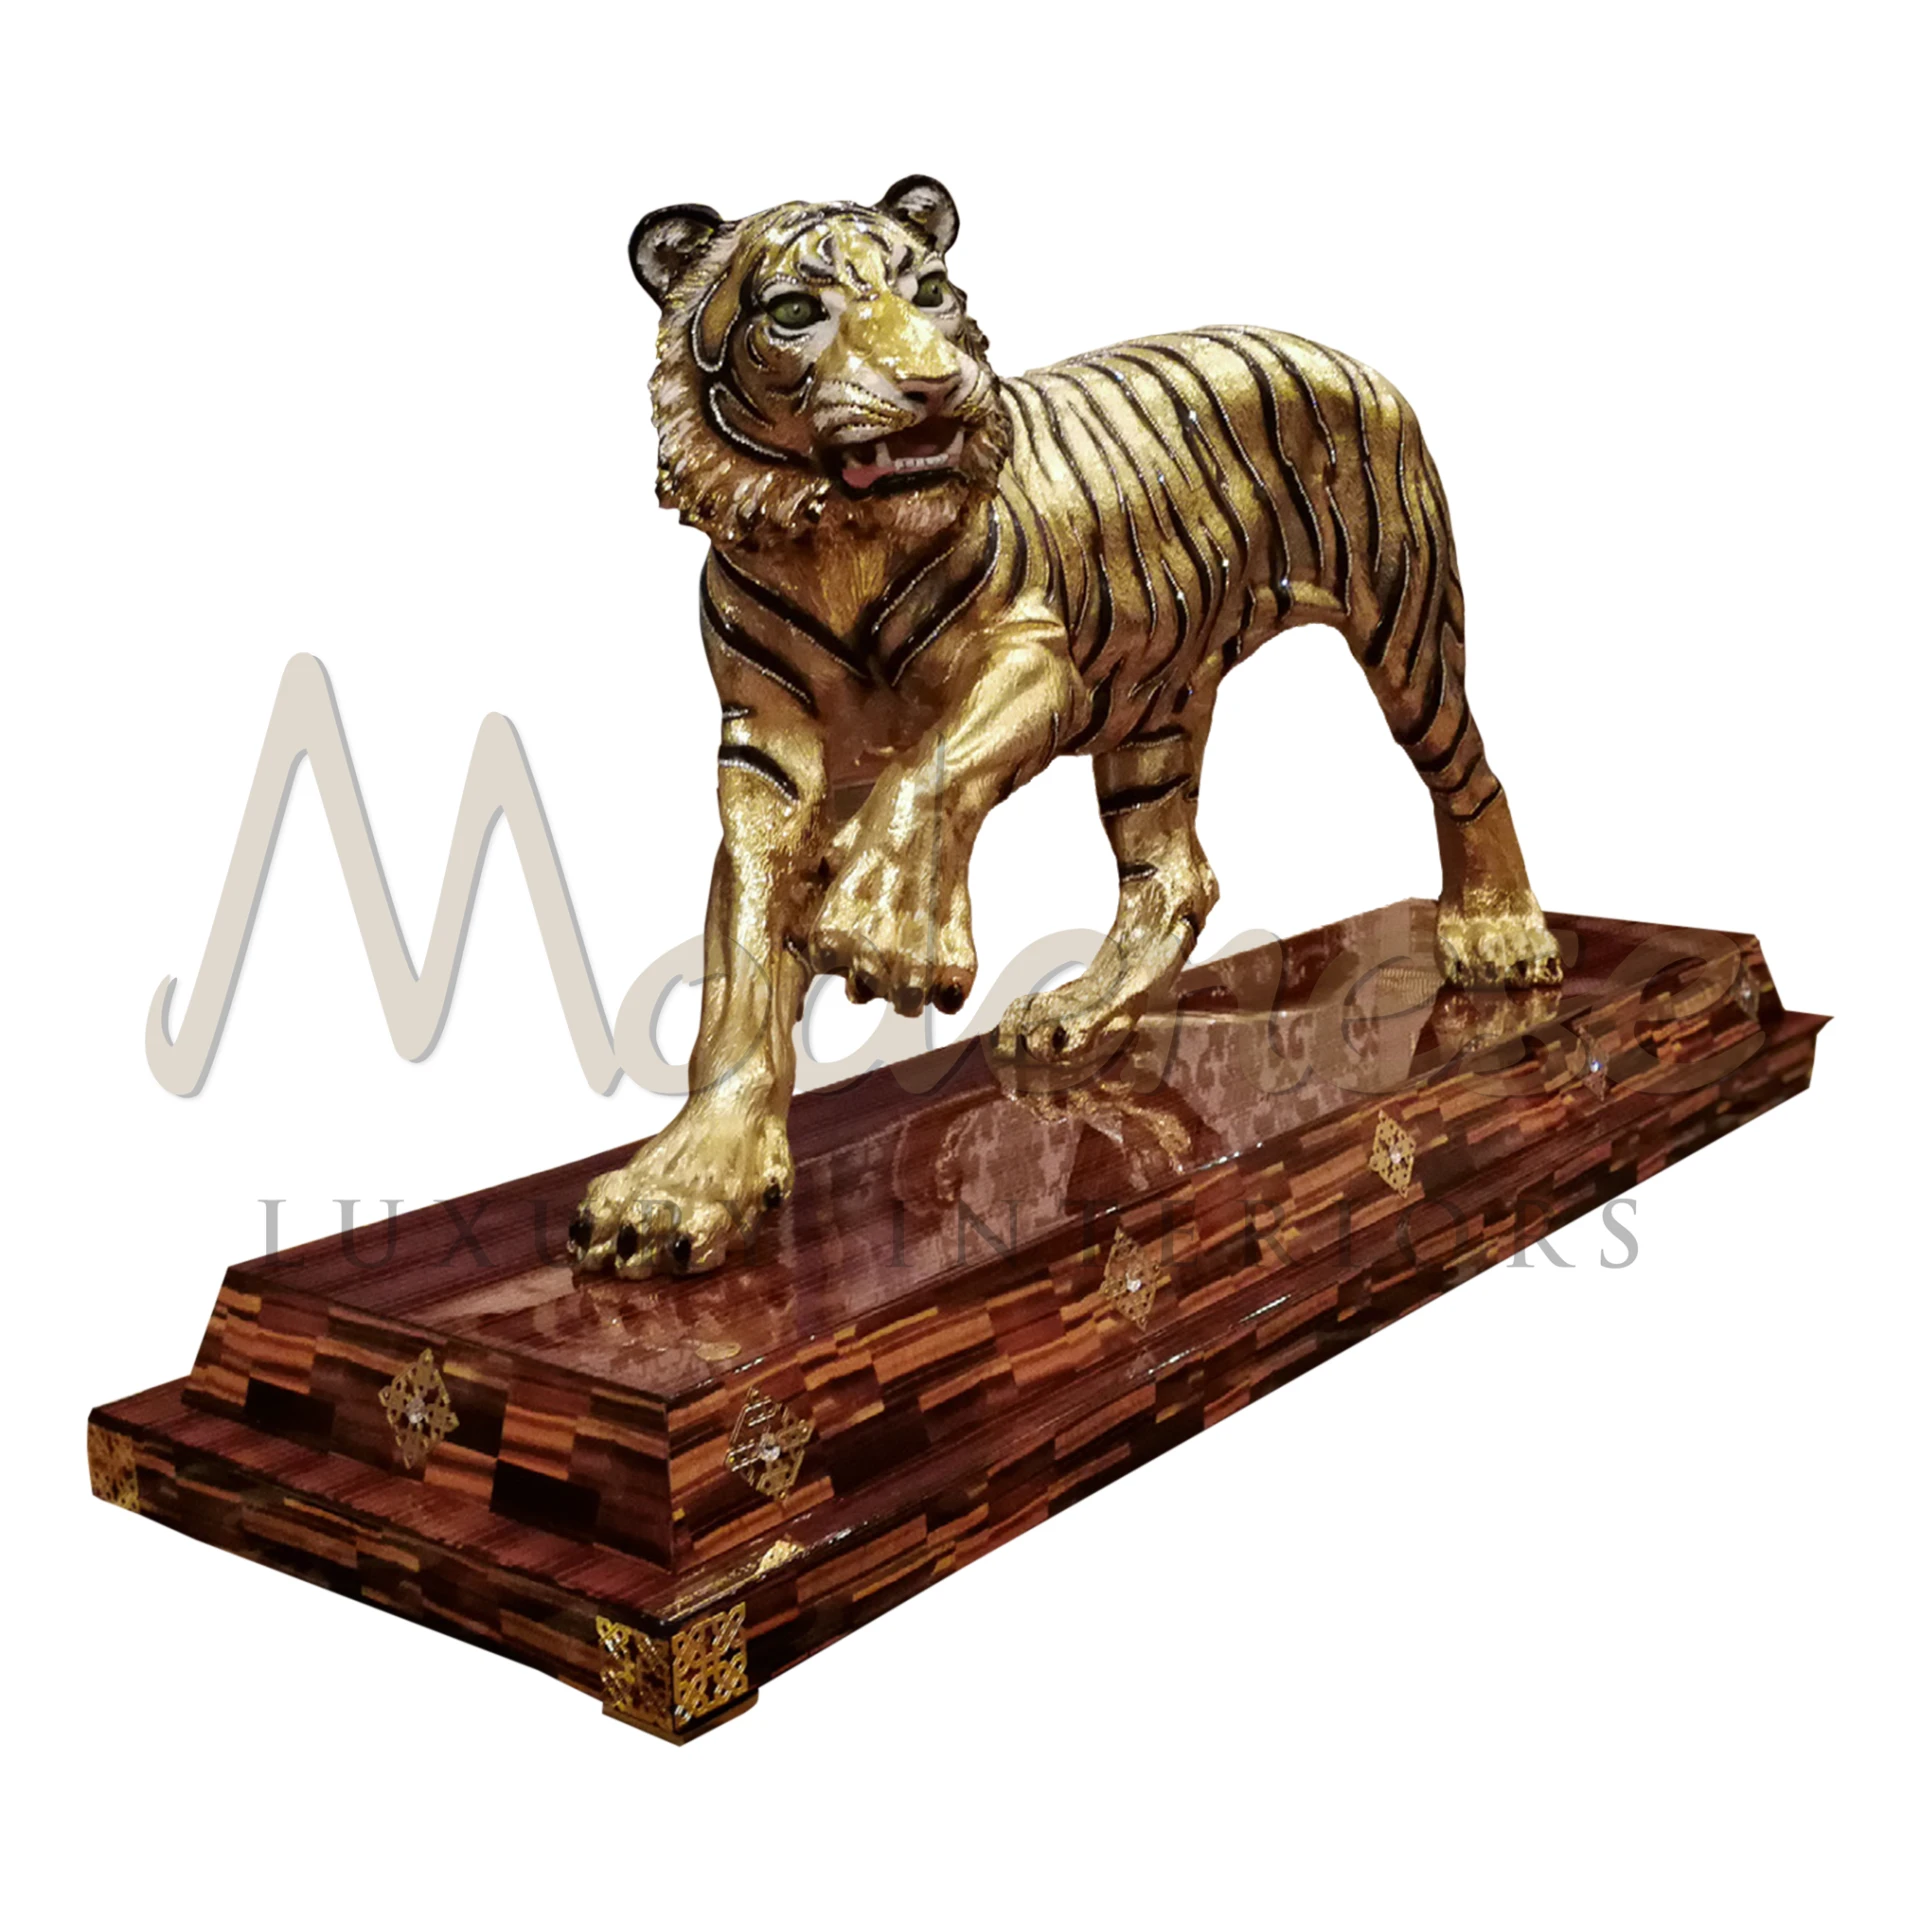 Powerful Tiger statuette, exquisitely crafted in high-quality materials, symbolizing strength and luxury in home décor, ideal for sophisticated interiors.